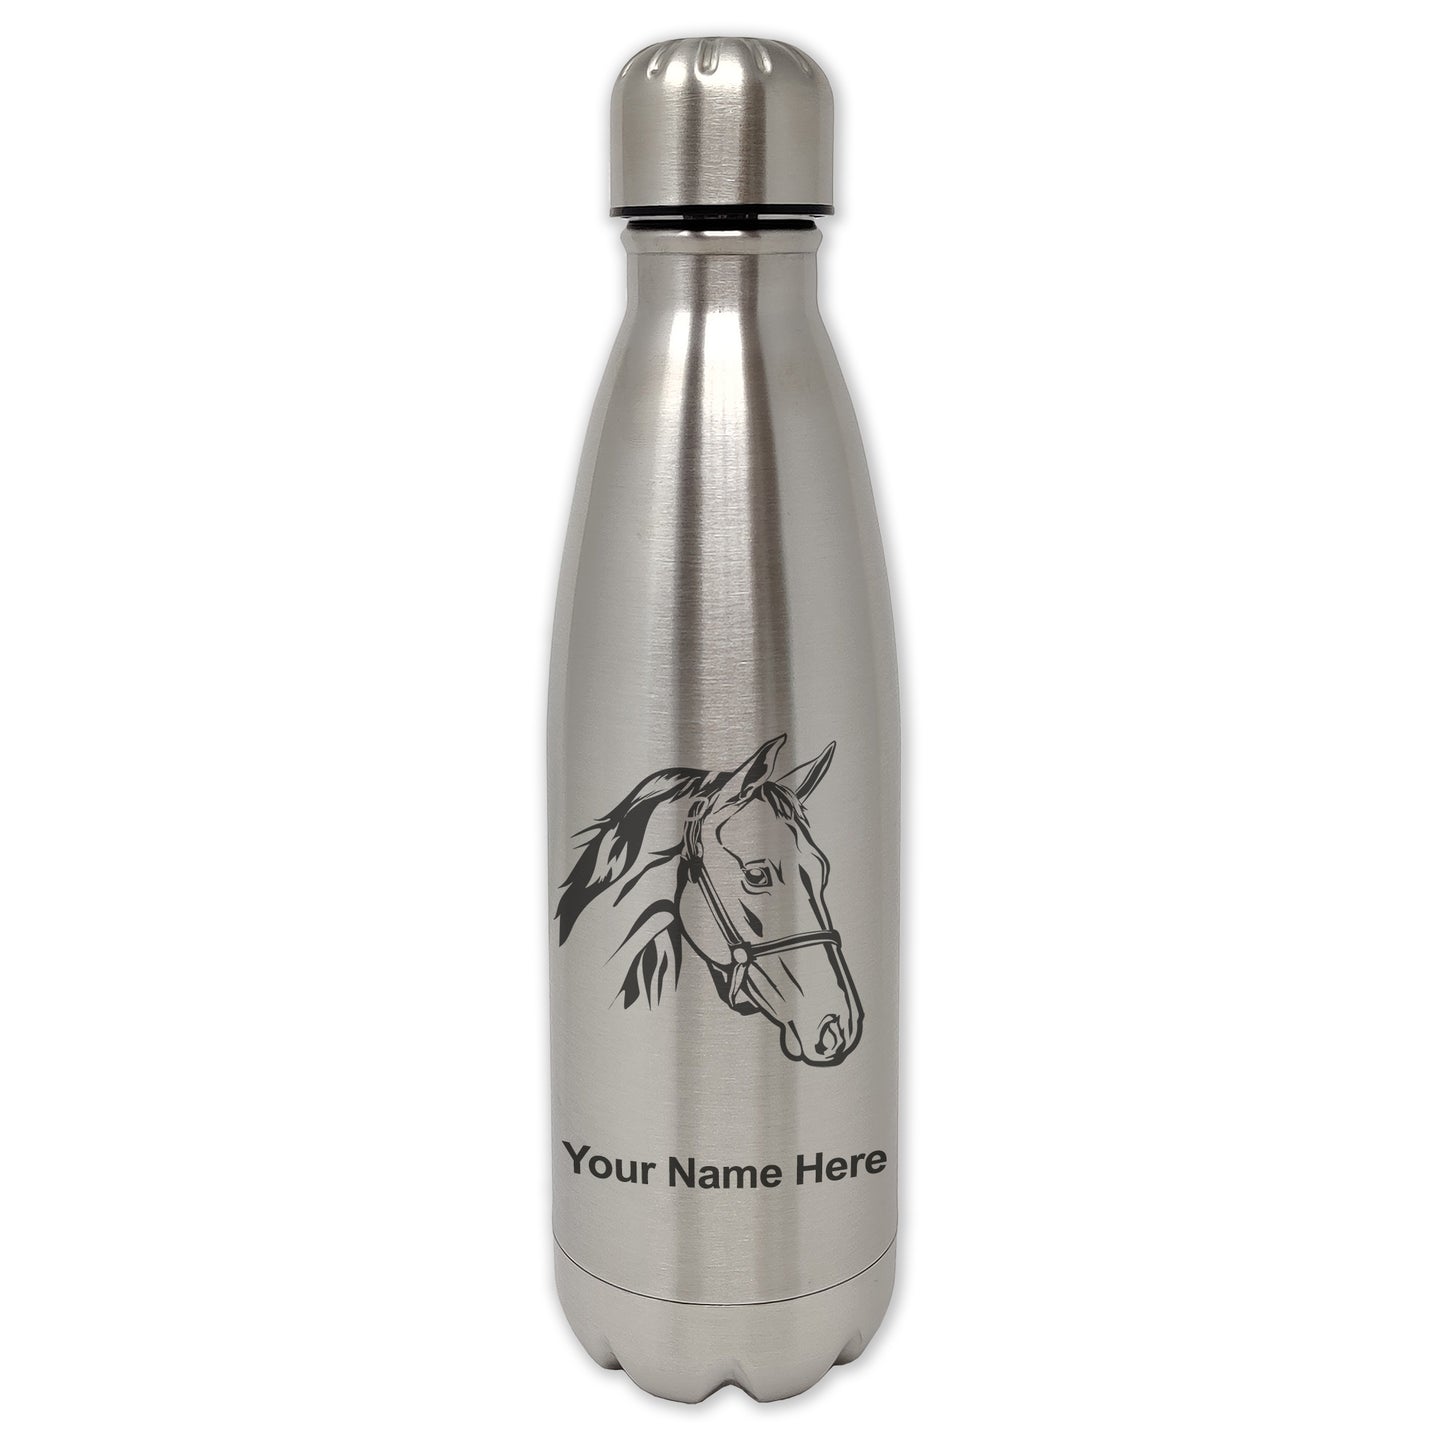 LaserGram Single Wall Water Bottle, Horse Head 2, Personalized Engraving Included